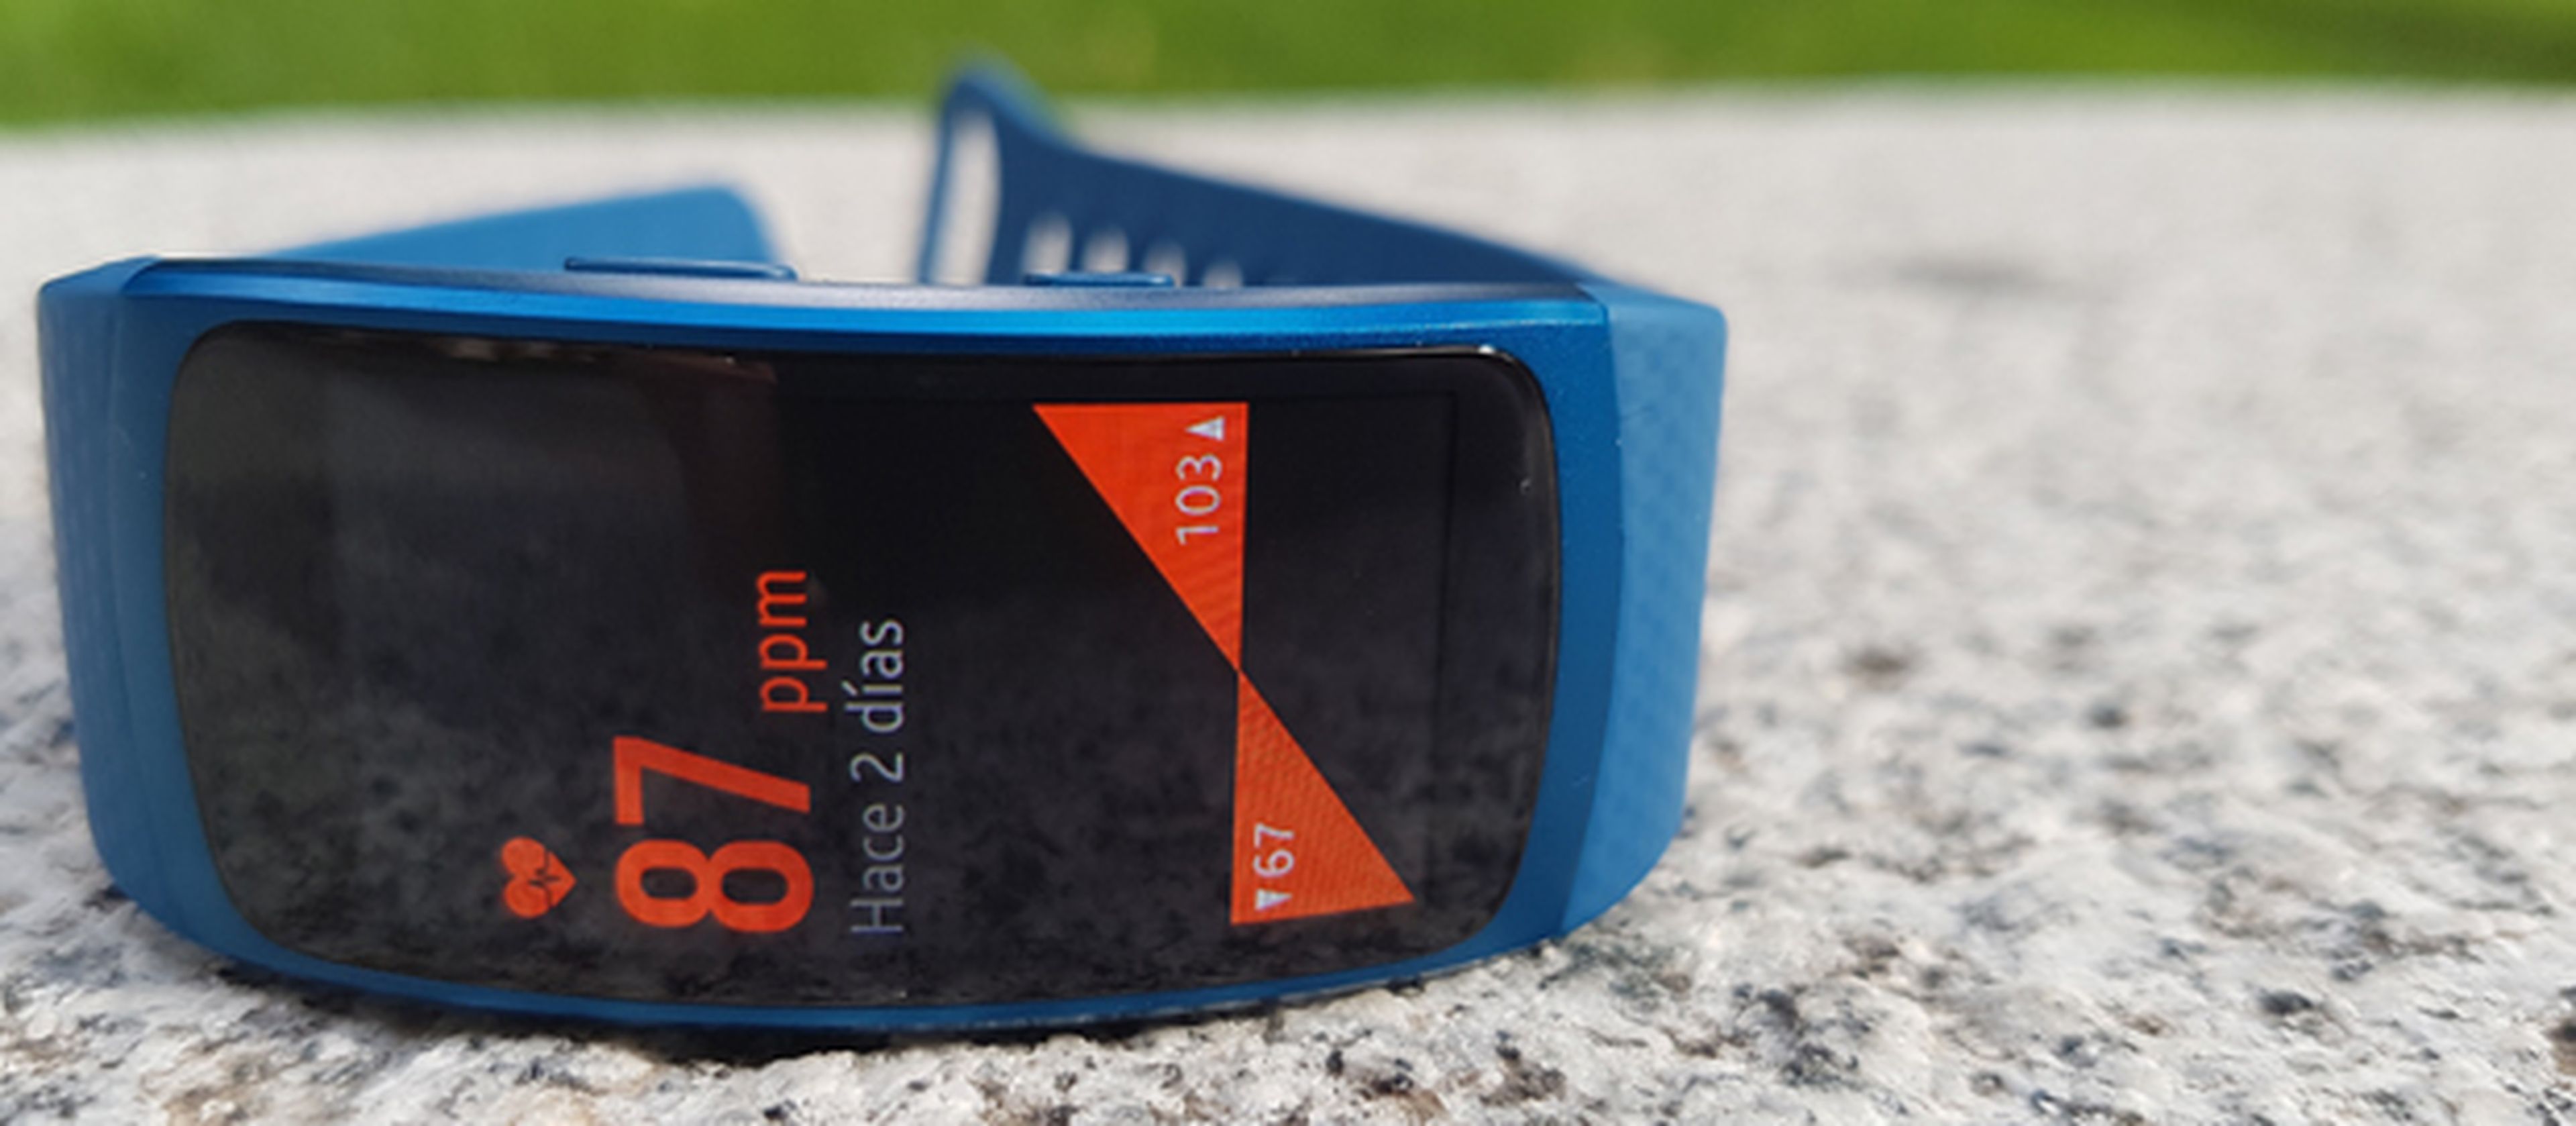 Pulsometro Gear Fit 2